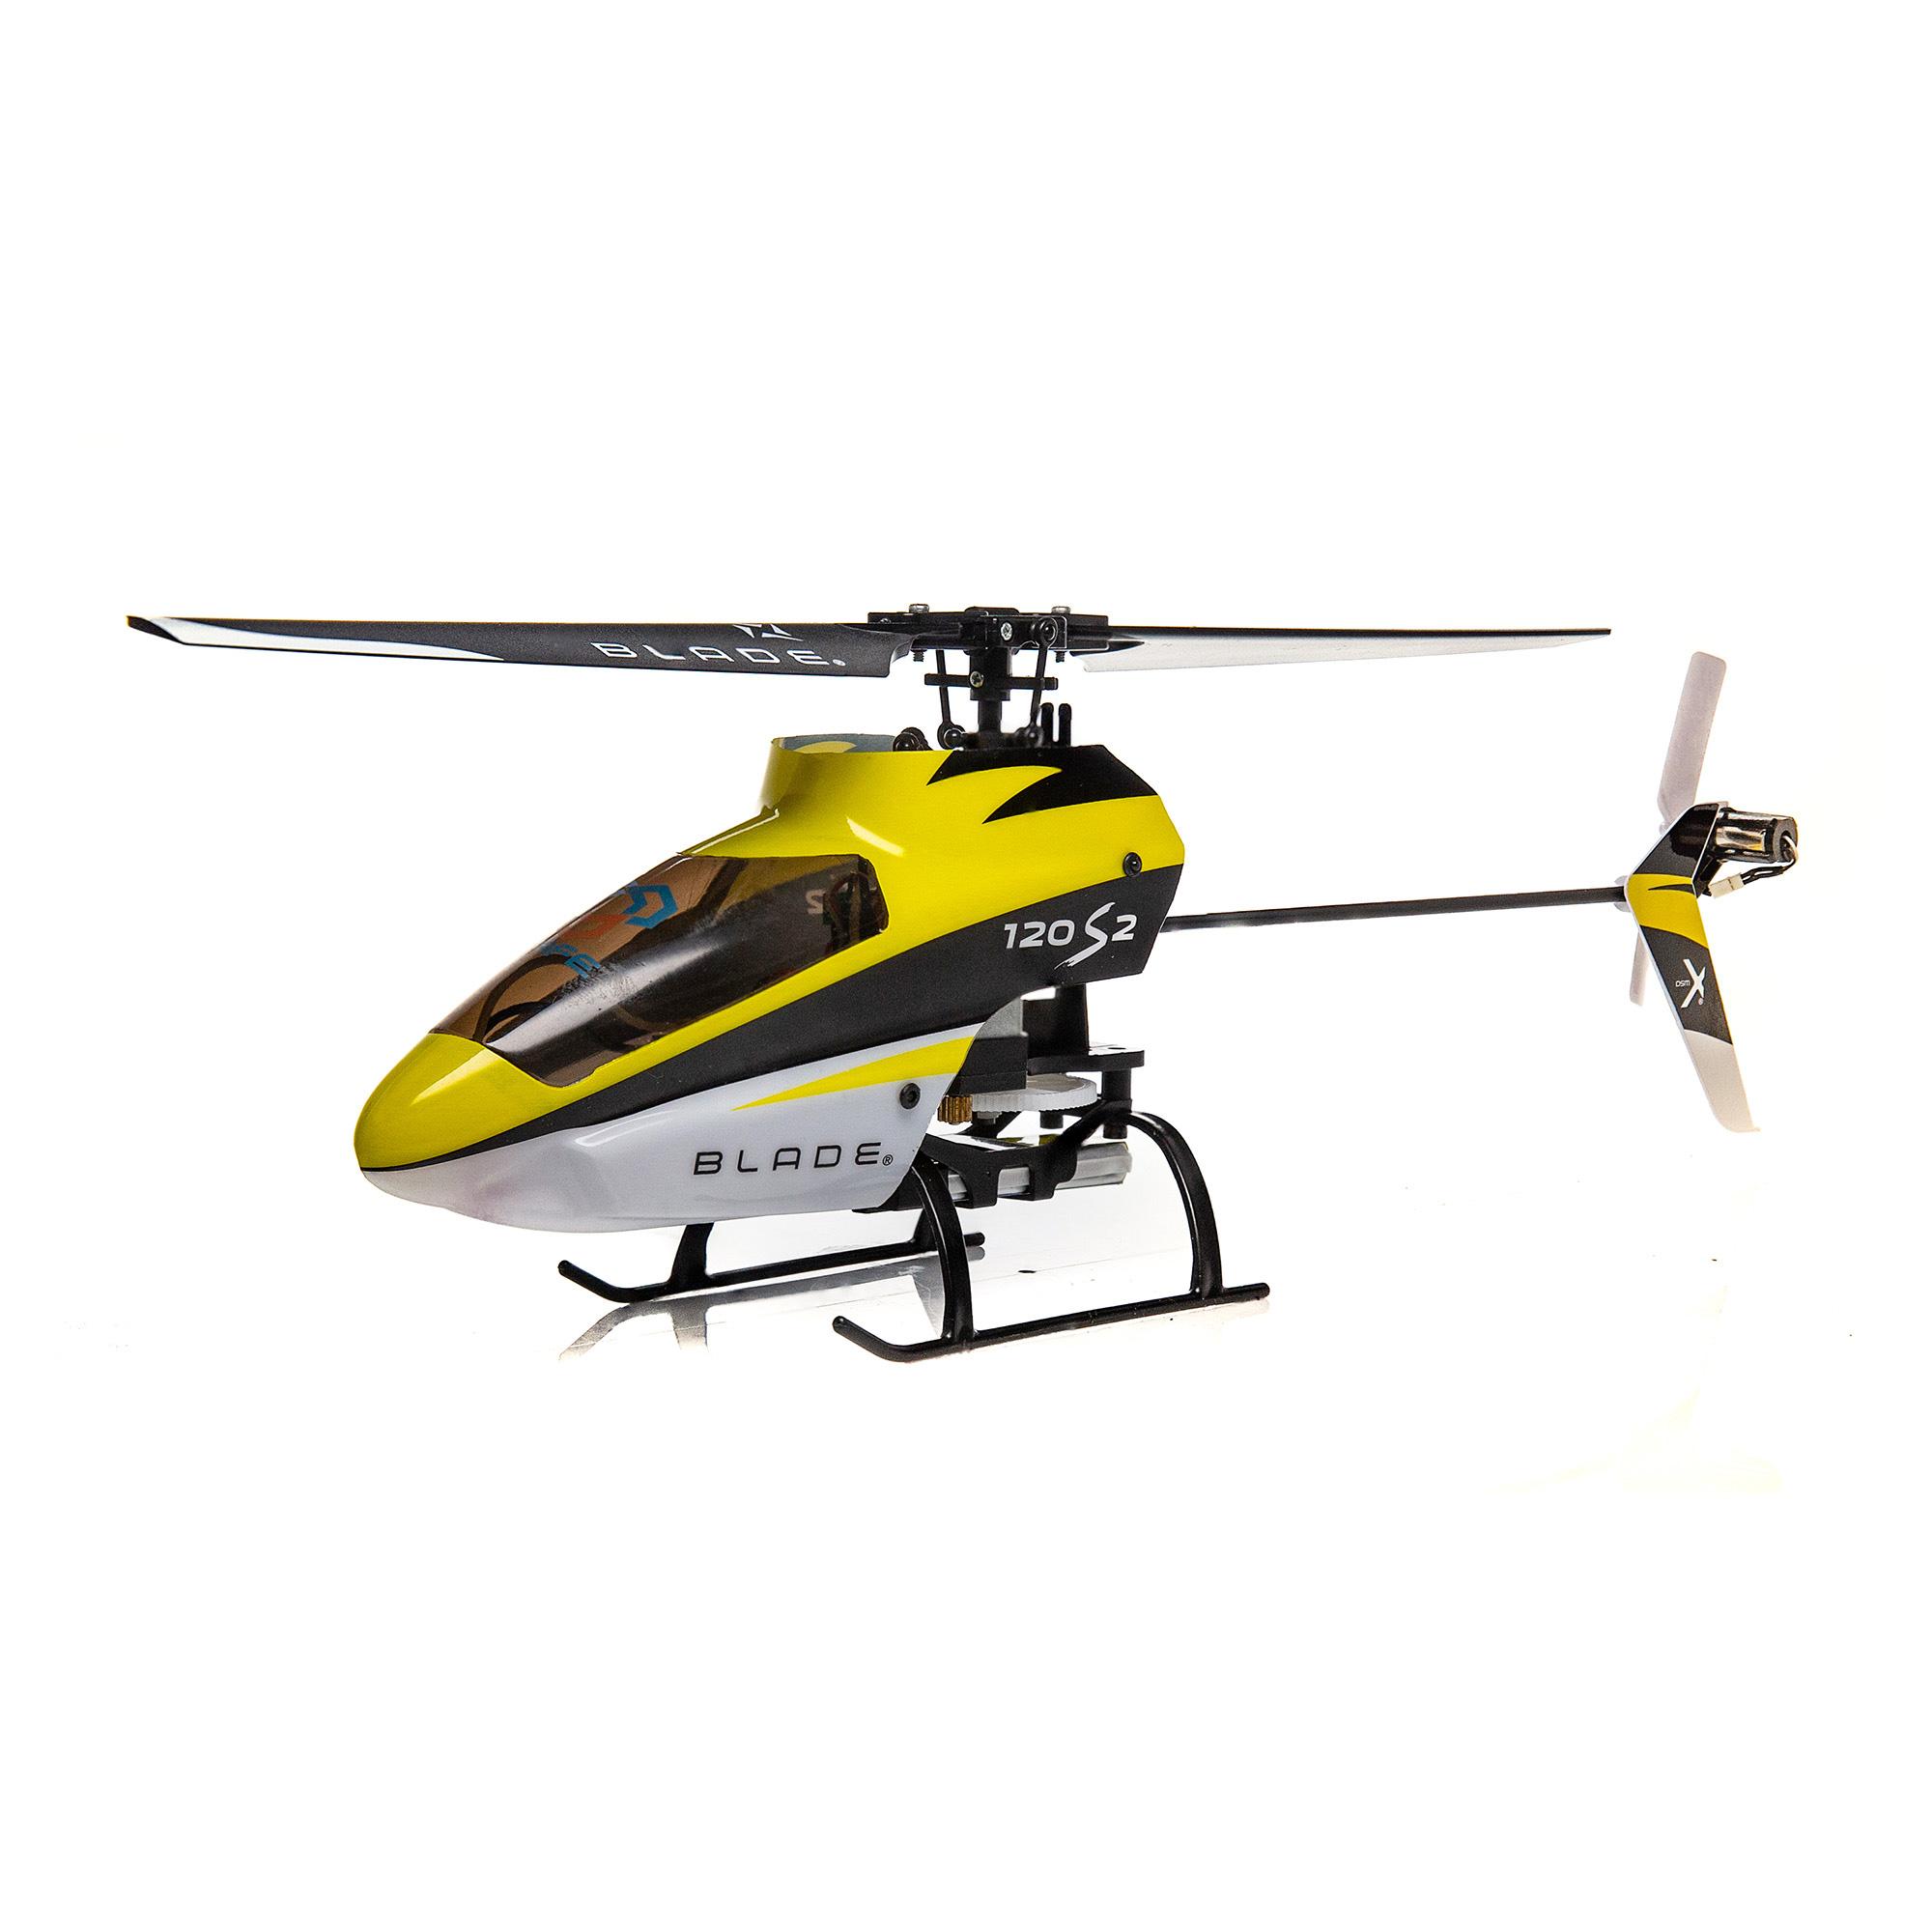 Blade Rc Helicopter: Advantages of Owning a Blade RC Helicopter